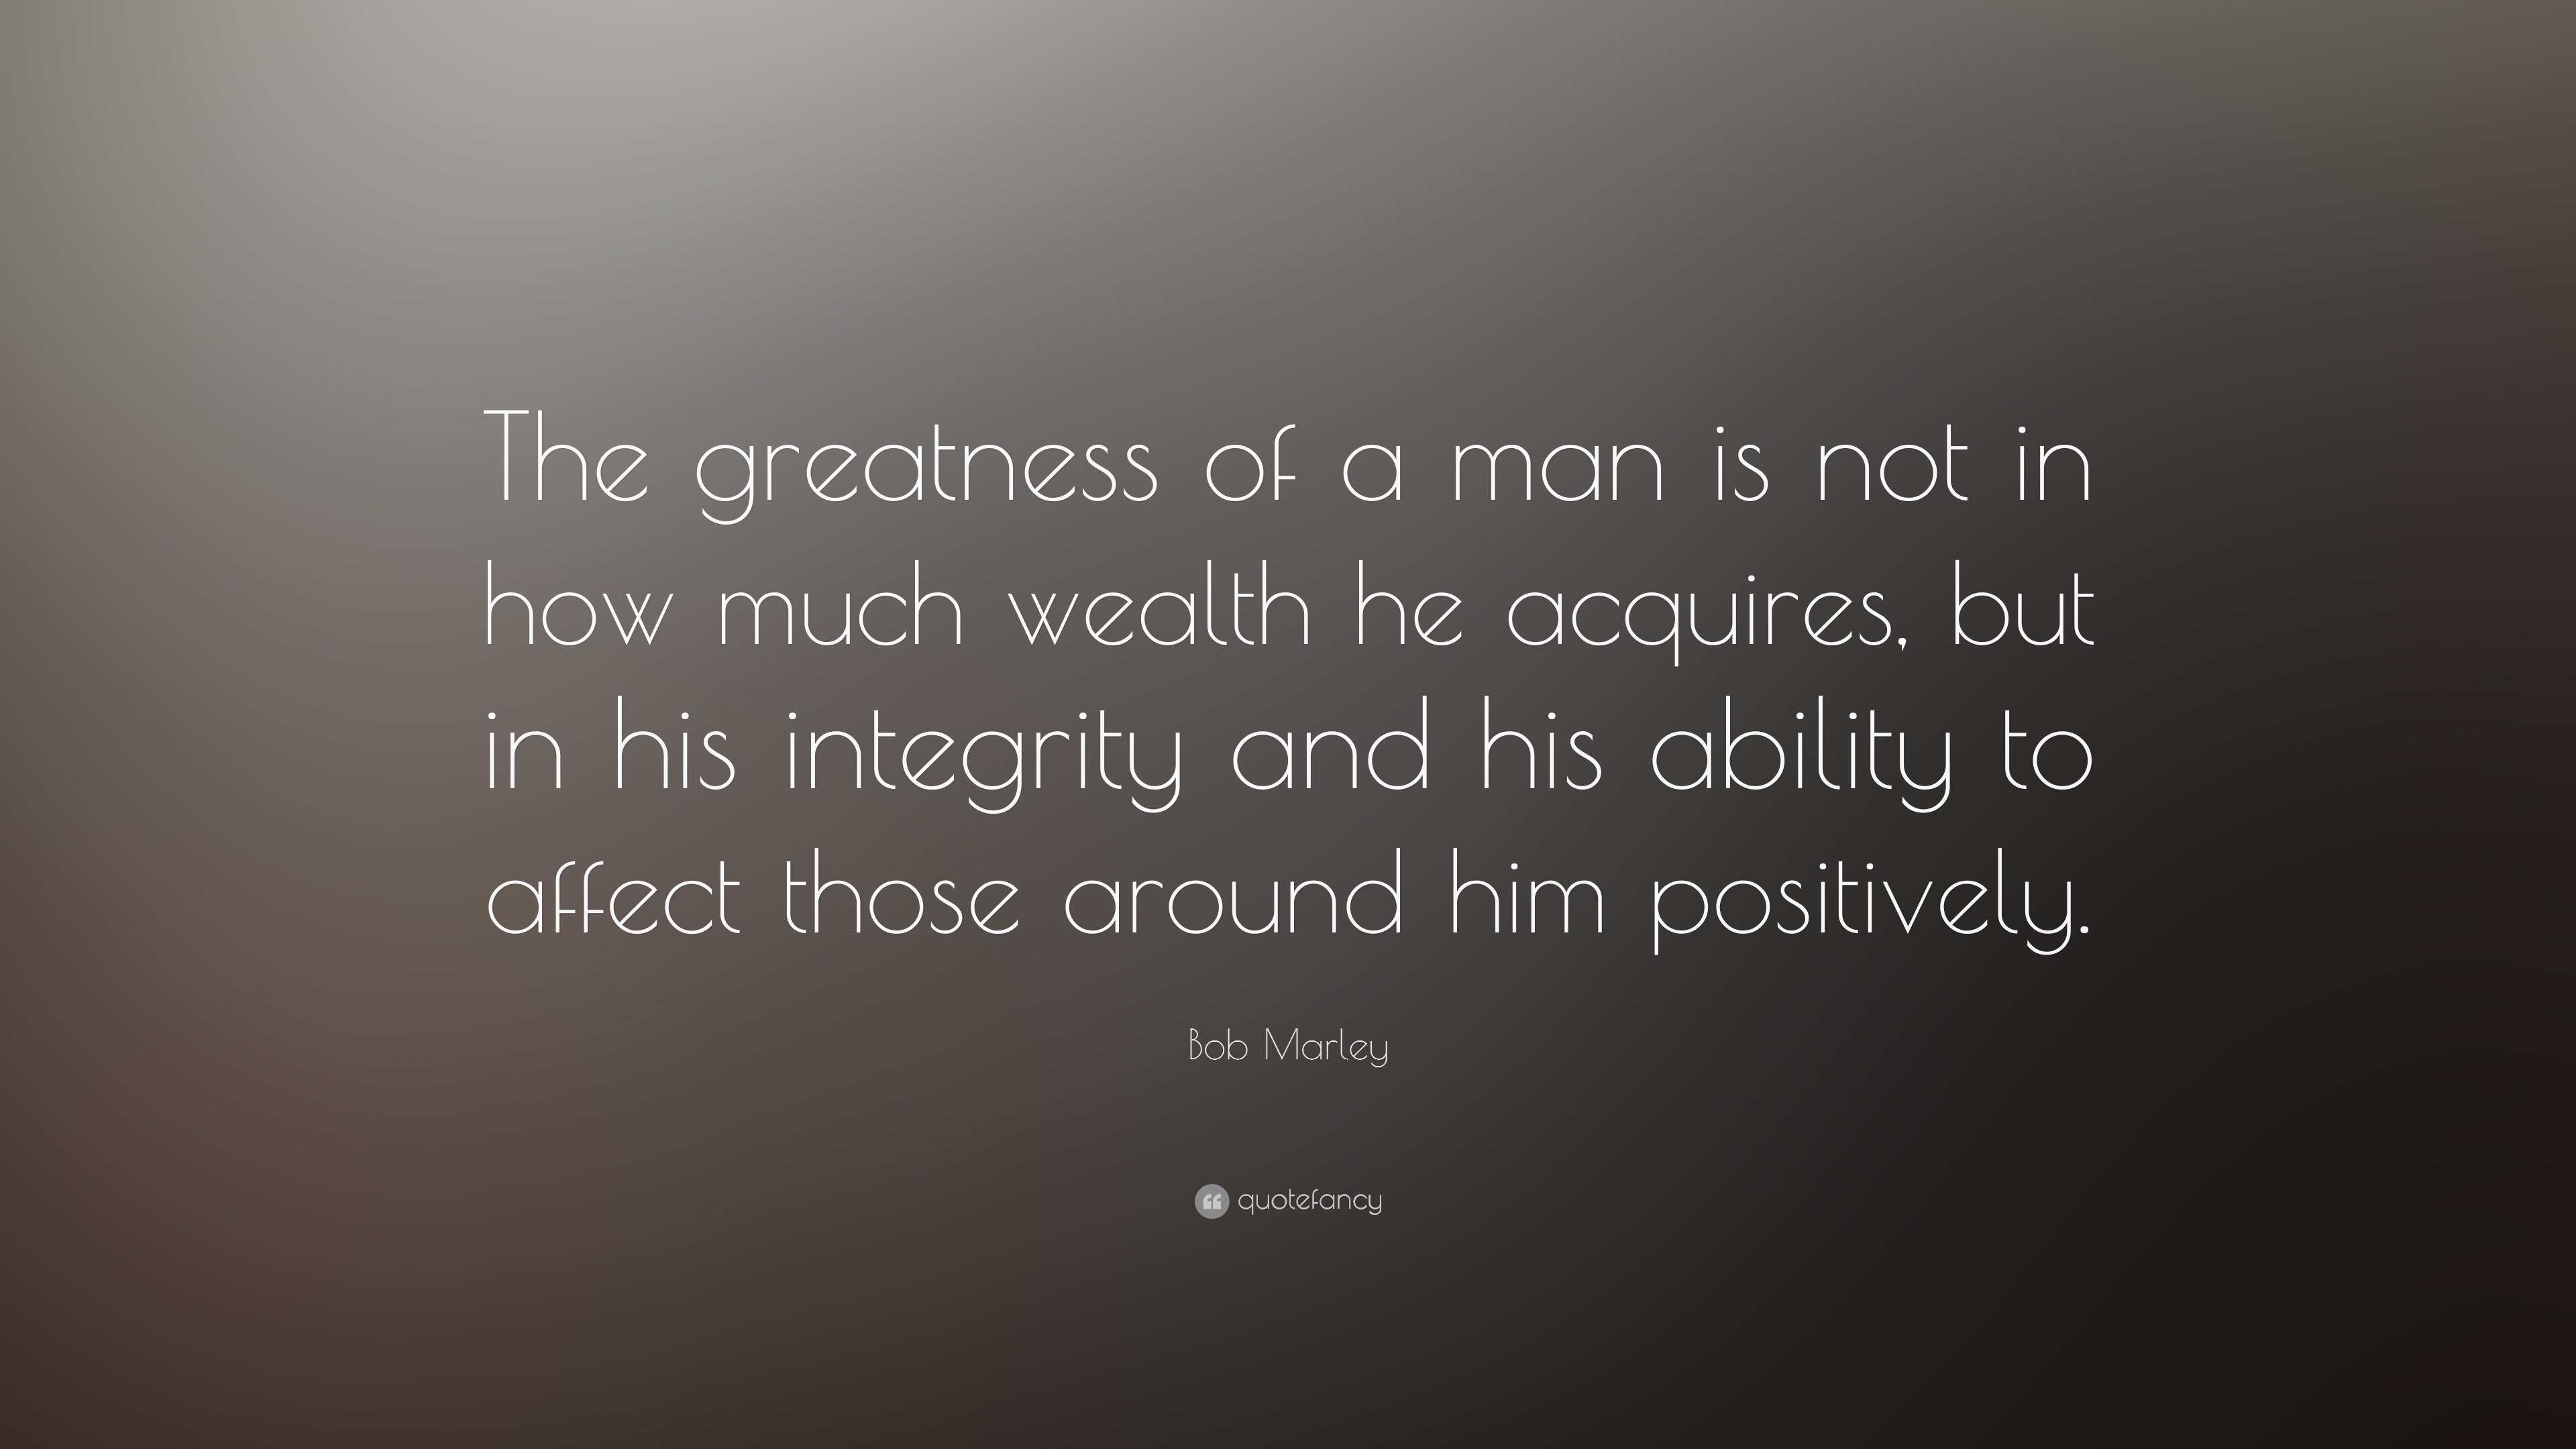 Bob Marley Quote “The greatness of a man is not in how much wealth